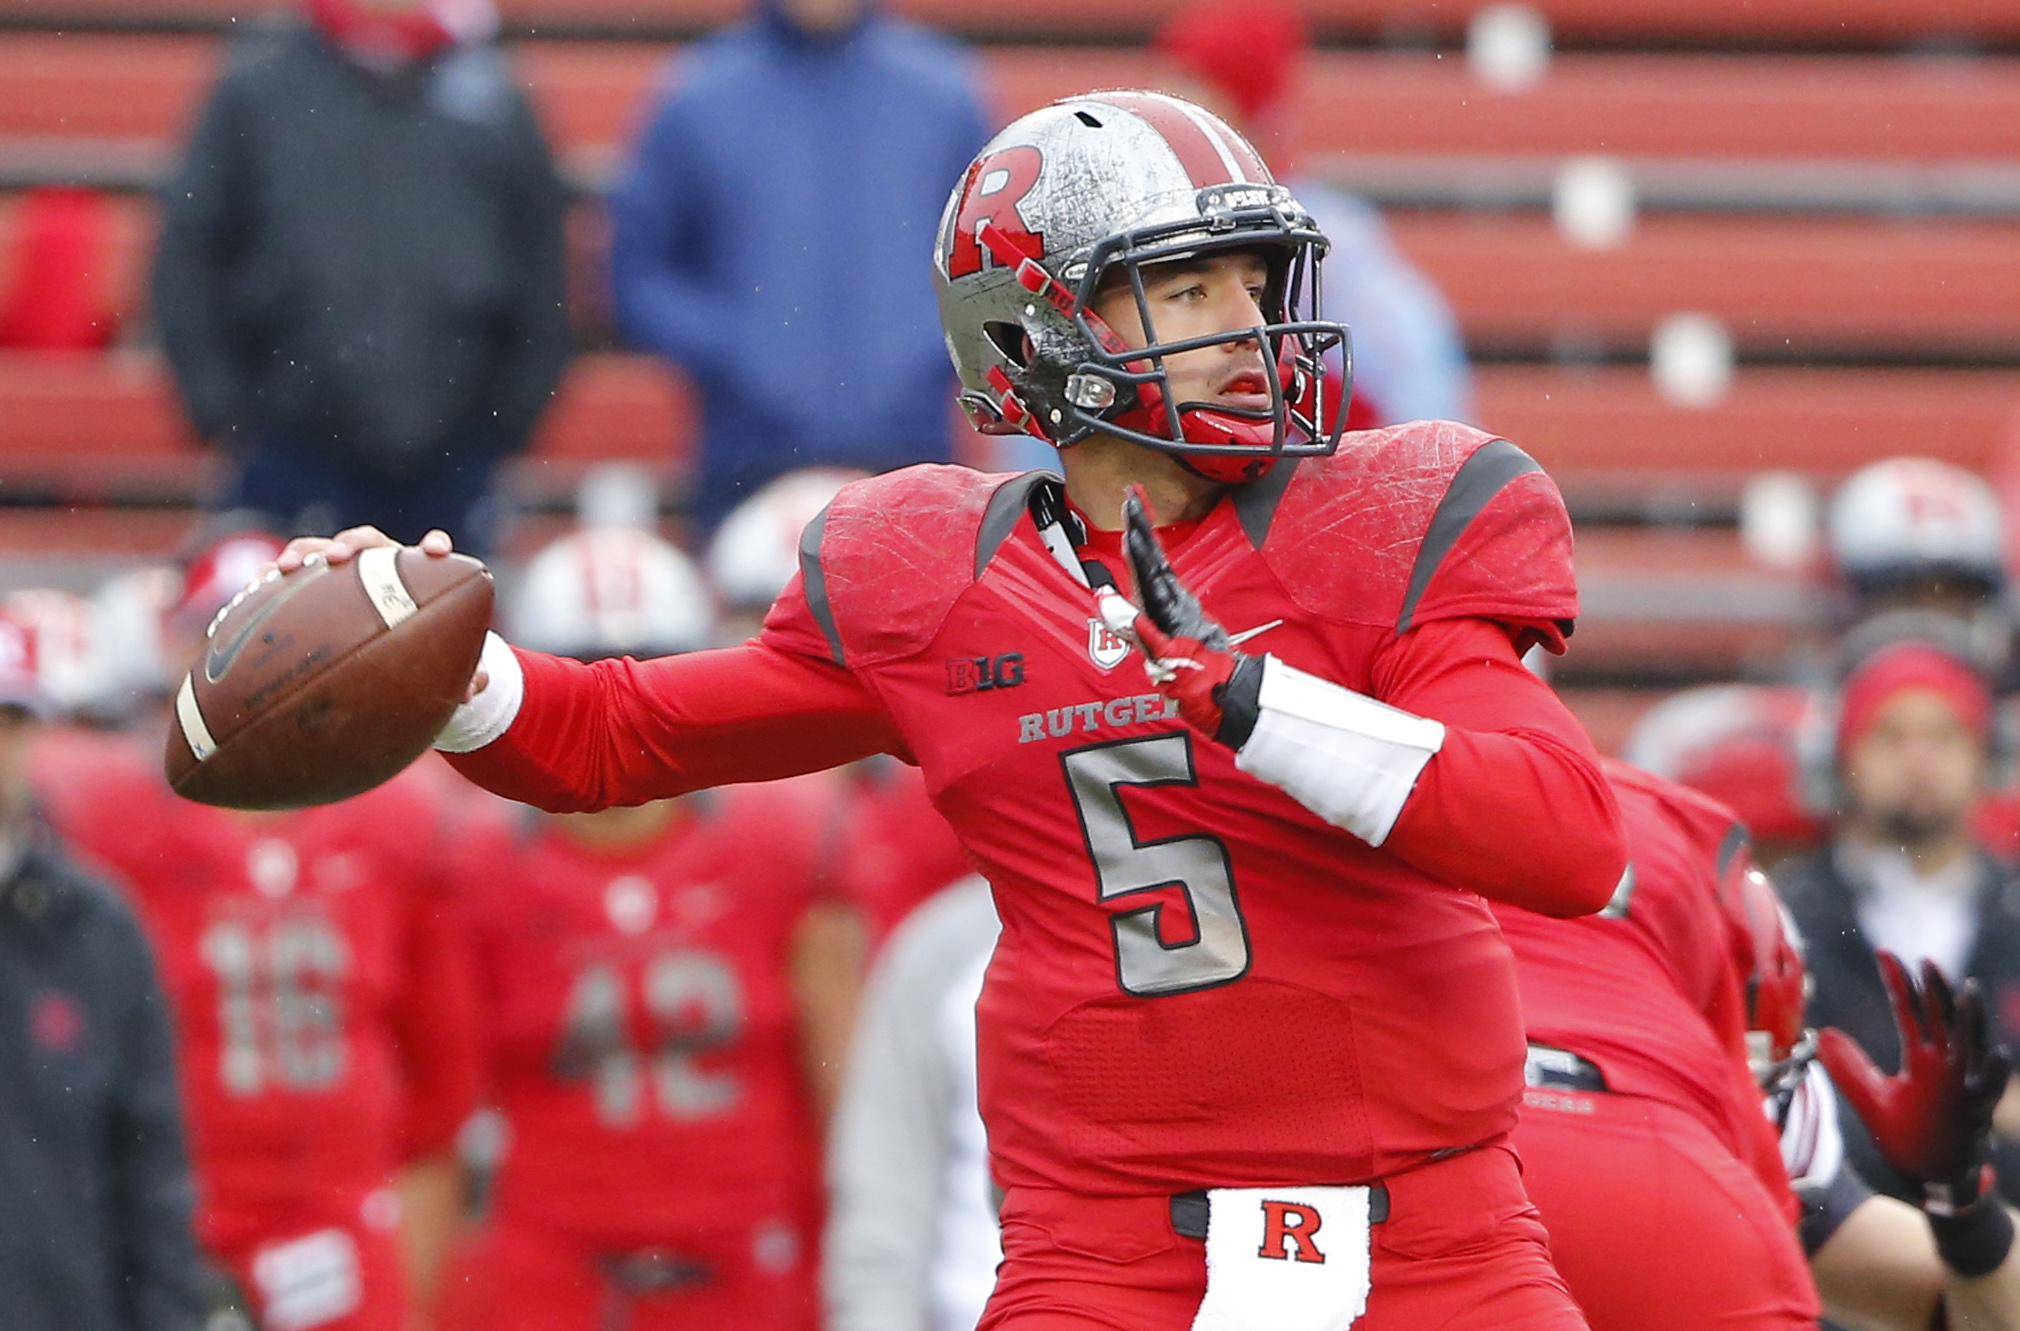 Video See top highlights from the Rutgers spring game Big Ten Network